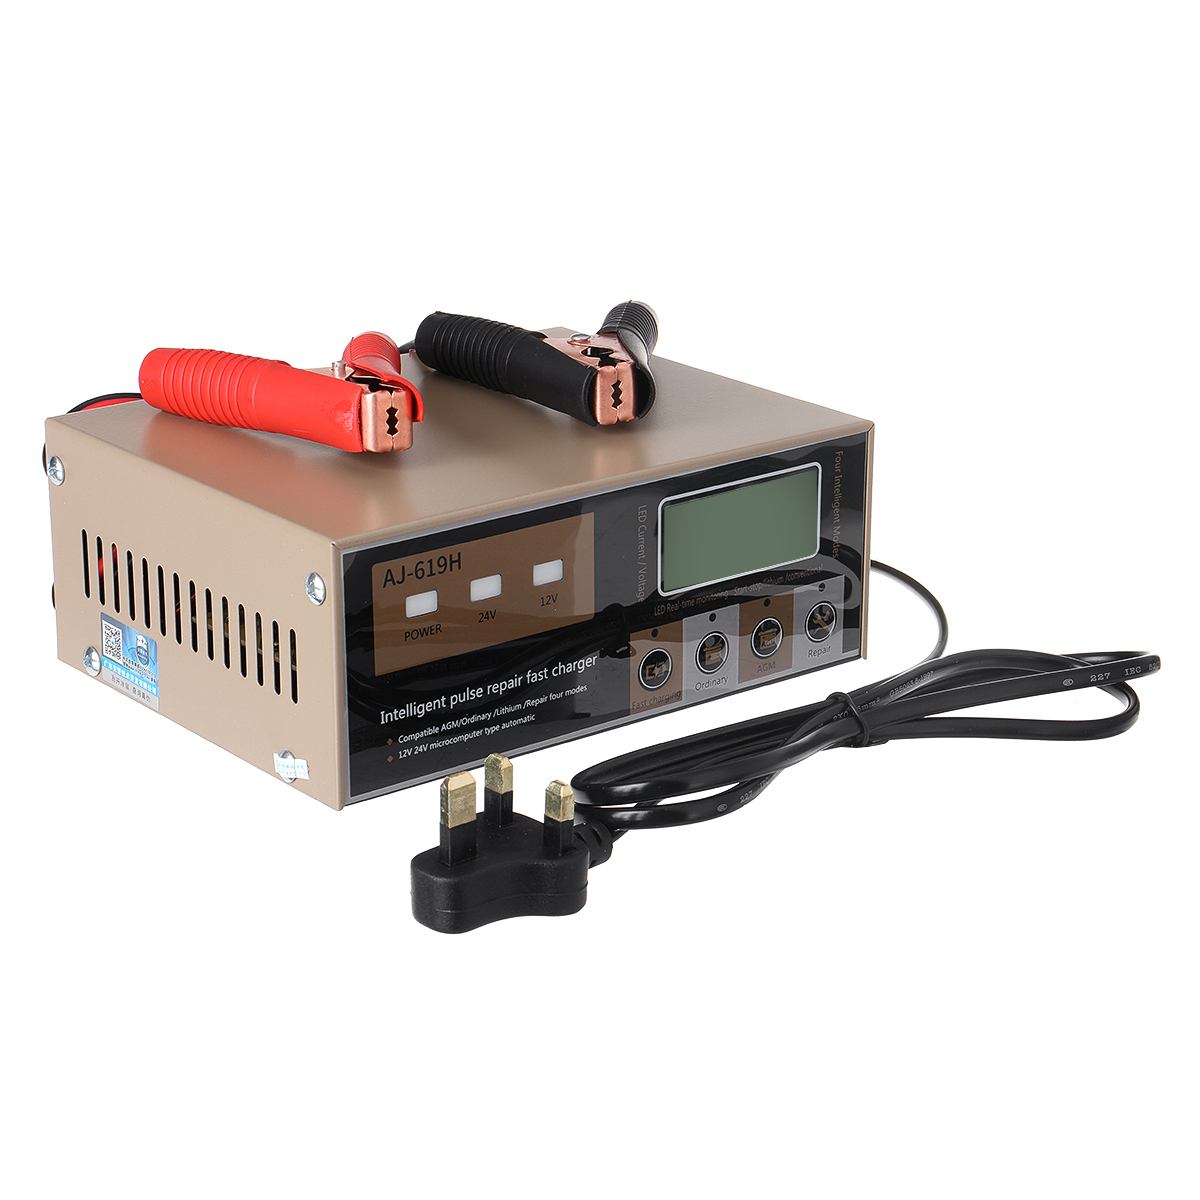 20A 12V/24V Smart Automatic Motorcycle Car Battery Charger Pulse Repair Lead-Acid Battery Charging